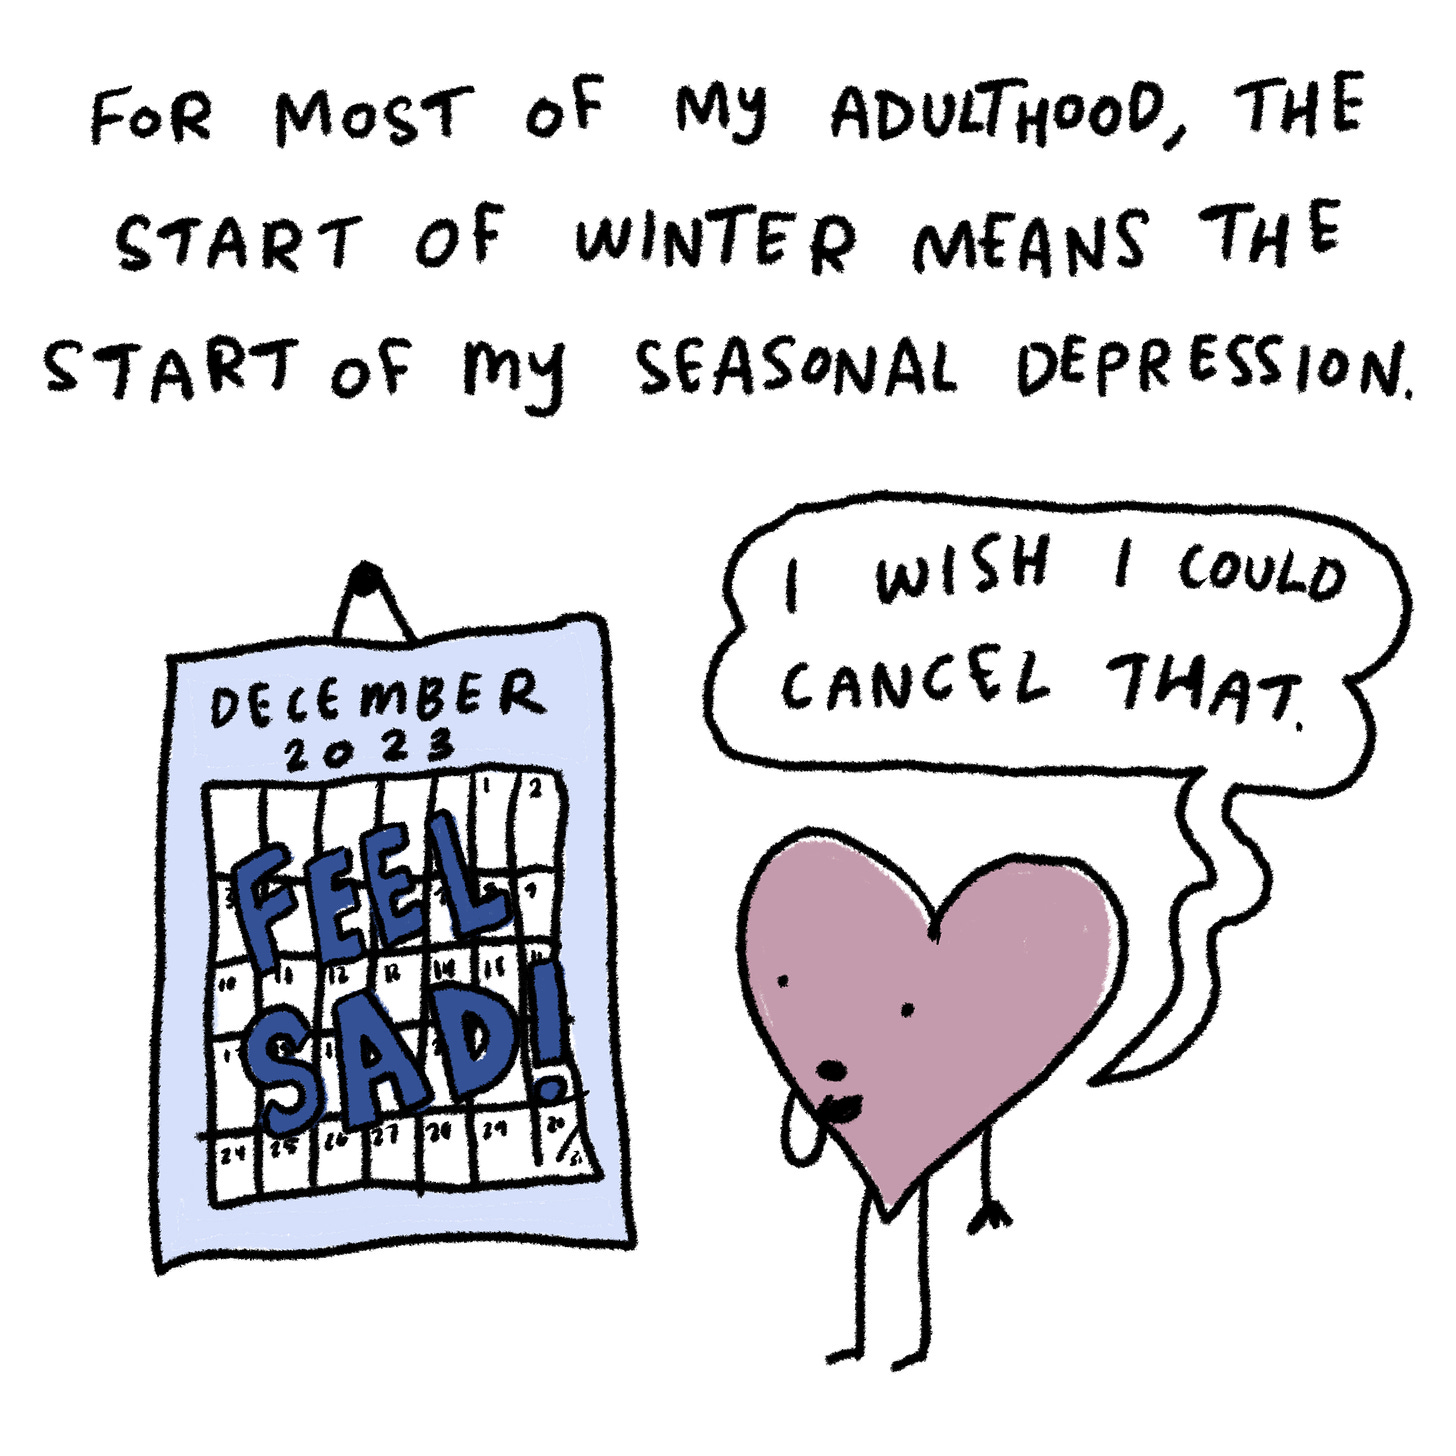 reads: For most of my adulthood, the start of winter means the start of my seasonal depression. 